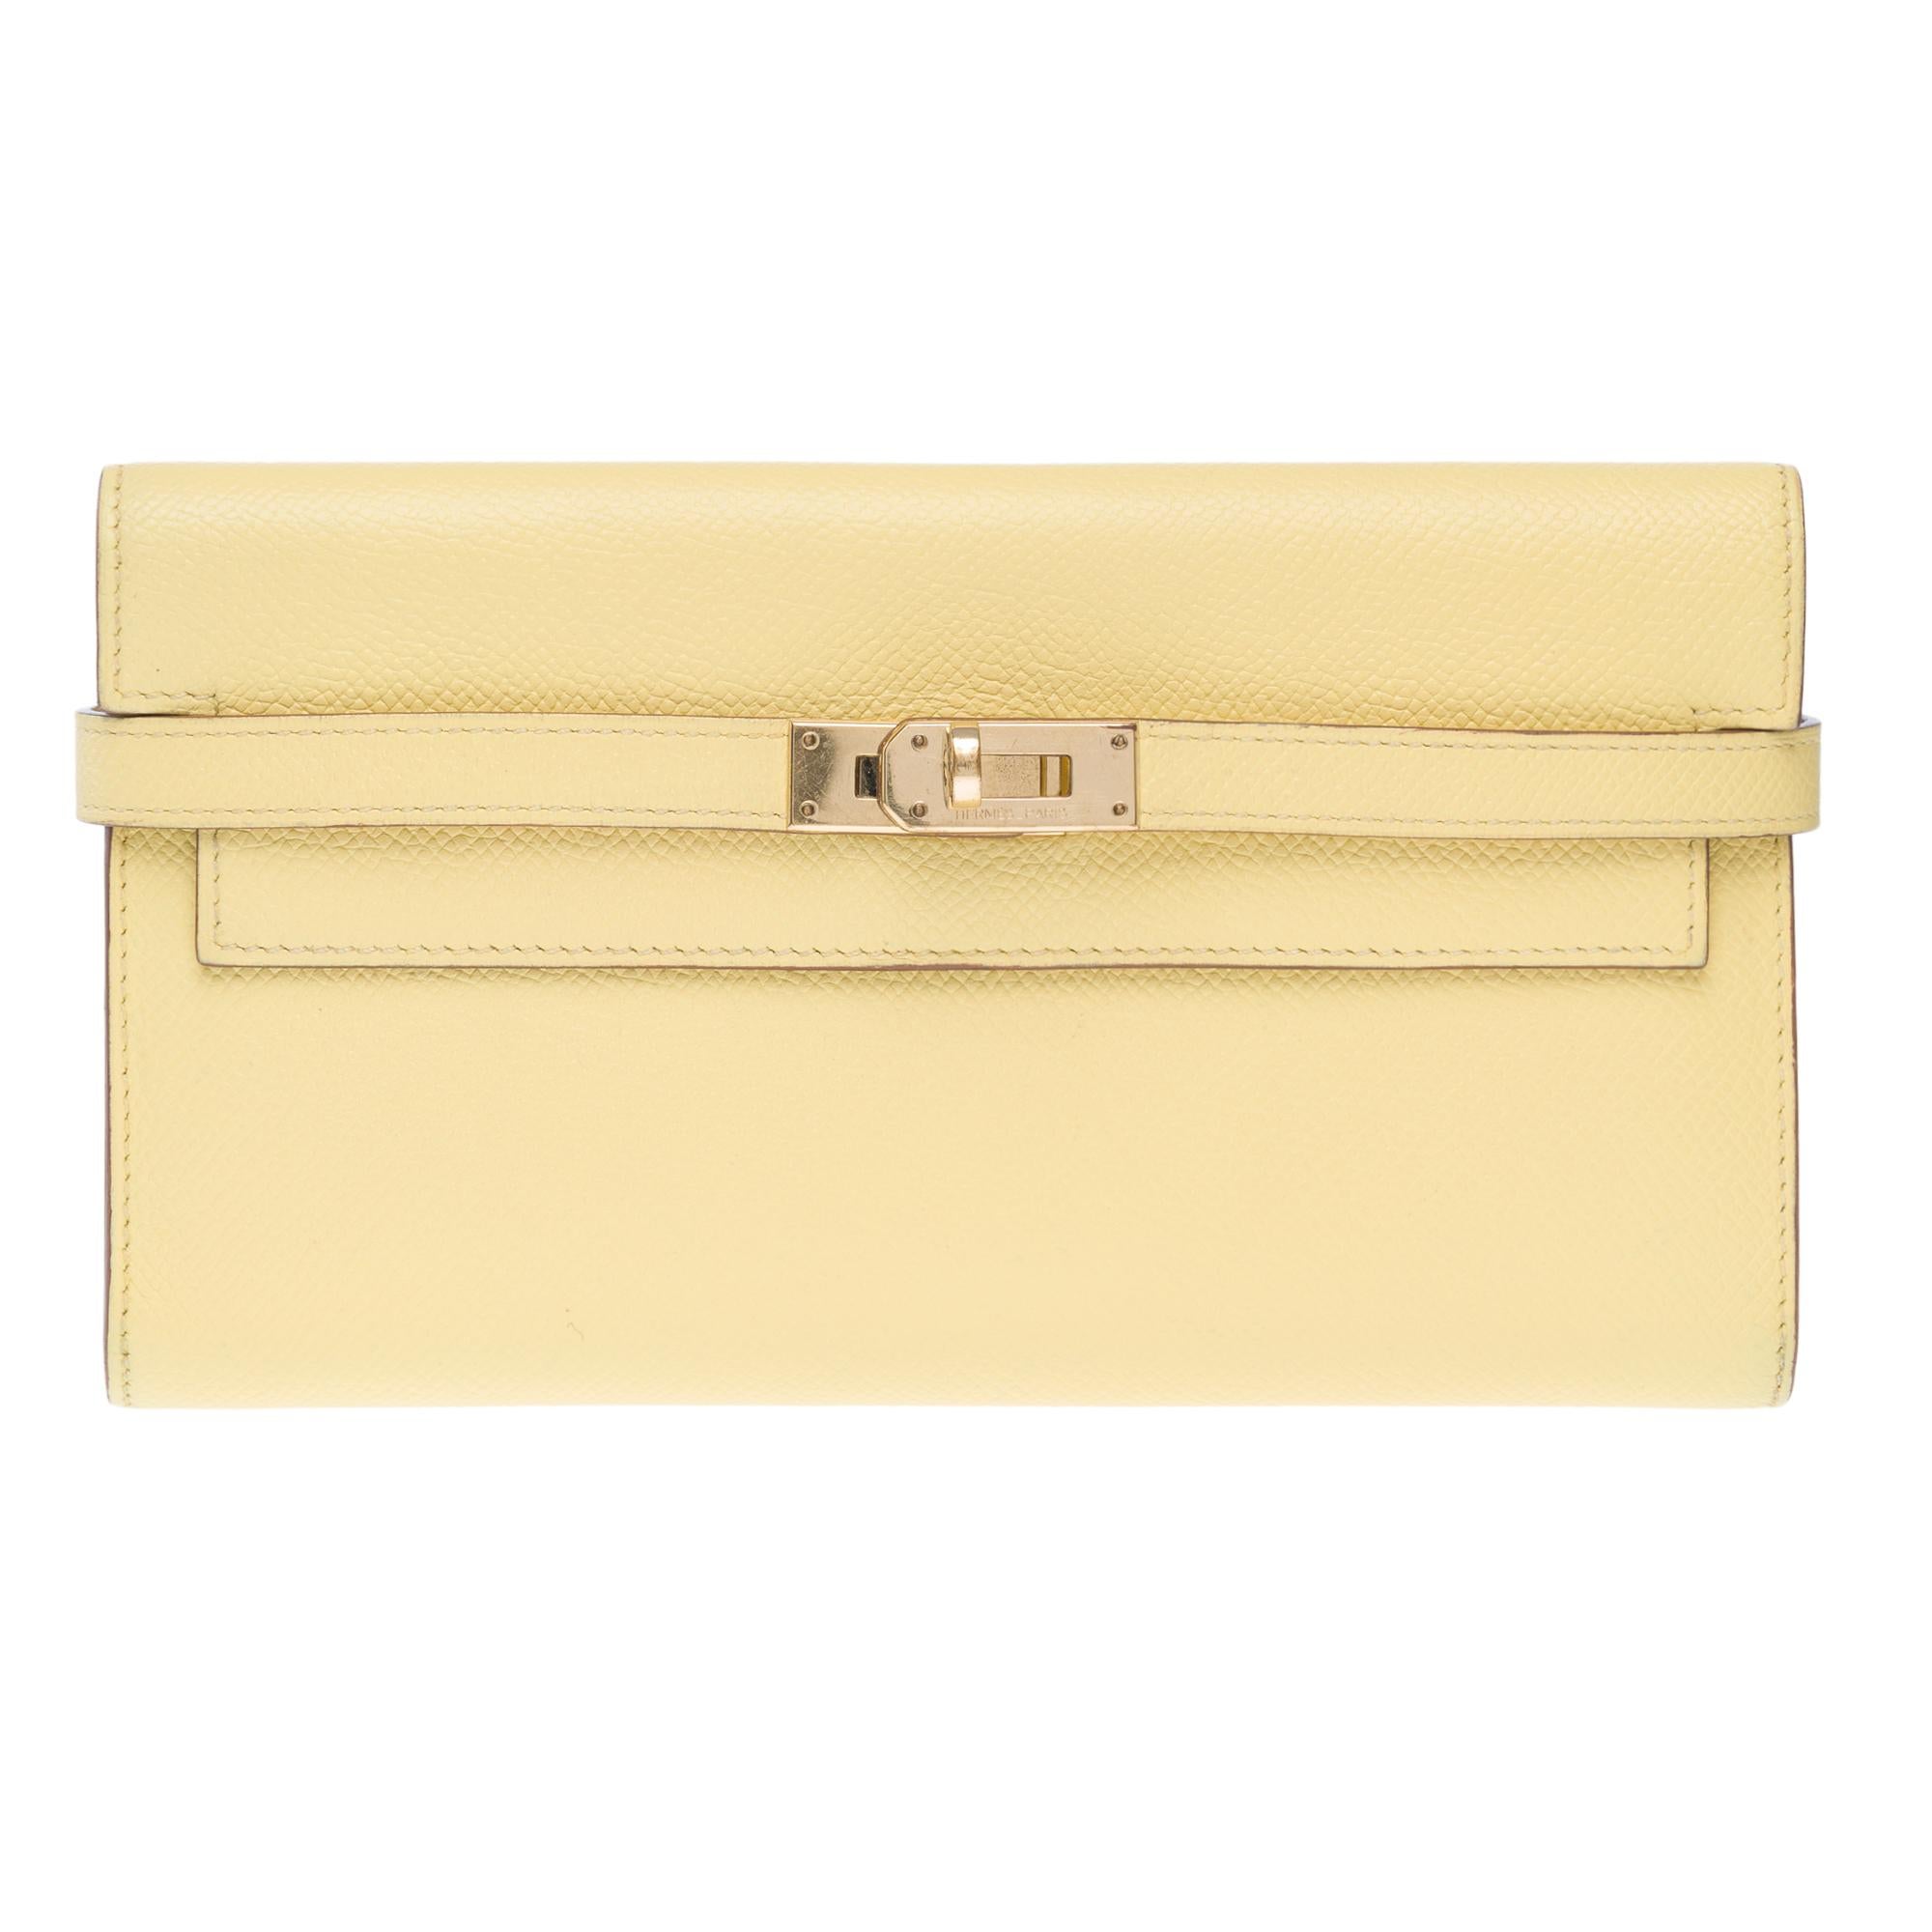 Gorgeous​ ​Hermès​ ​Kelly​ ​Wallet​ ​in​ ​Yellow​ ​Poussin​ ​Epsom​ ​calf​ ​leather,​ ​gold​ ​plated​ ​metal​ ​trim​ ​for​ ​a​ ​hand​ ​carry

Flap​ ​closure
Yellow​ ​leather​ ​inner​ ​lining,​ ​3​ ​compartments​ ​including​ ​one​ ​zipped,​ ​two​